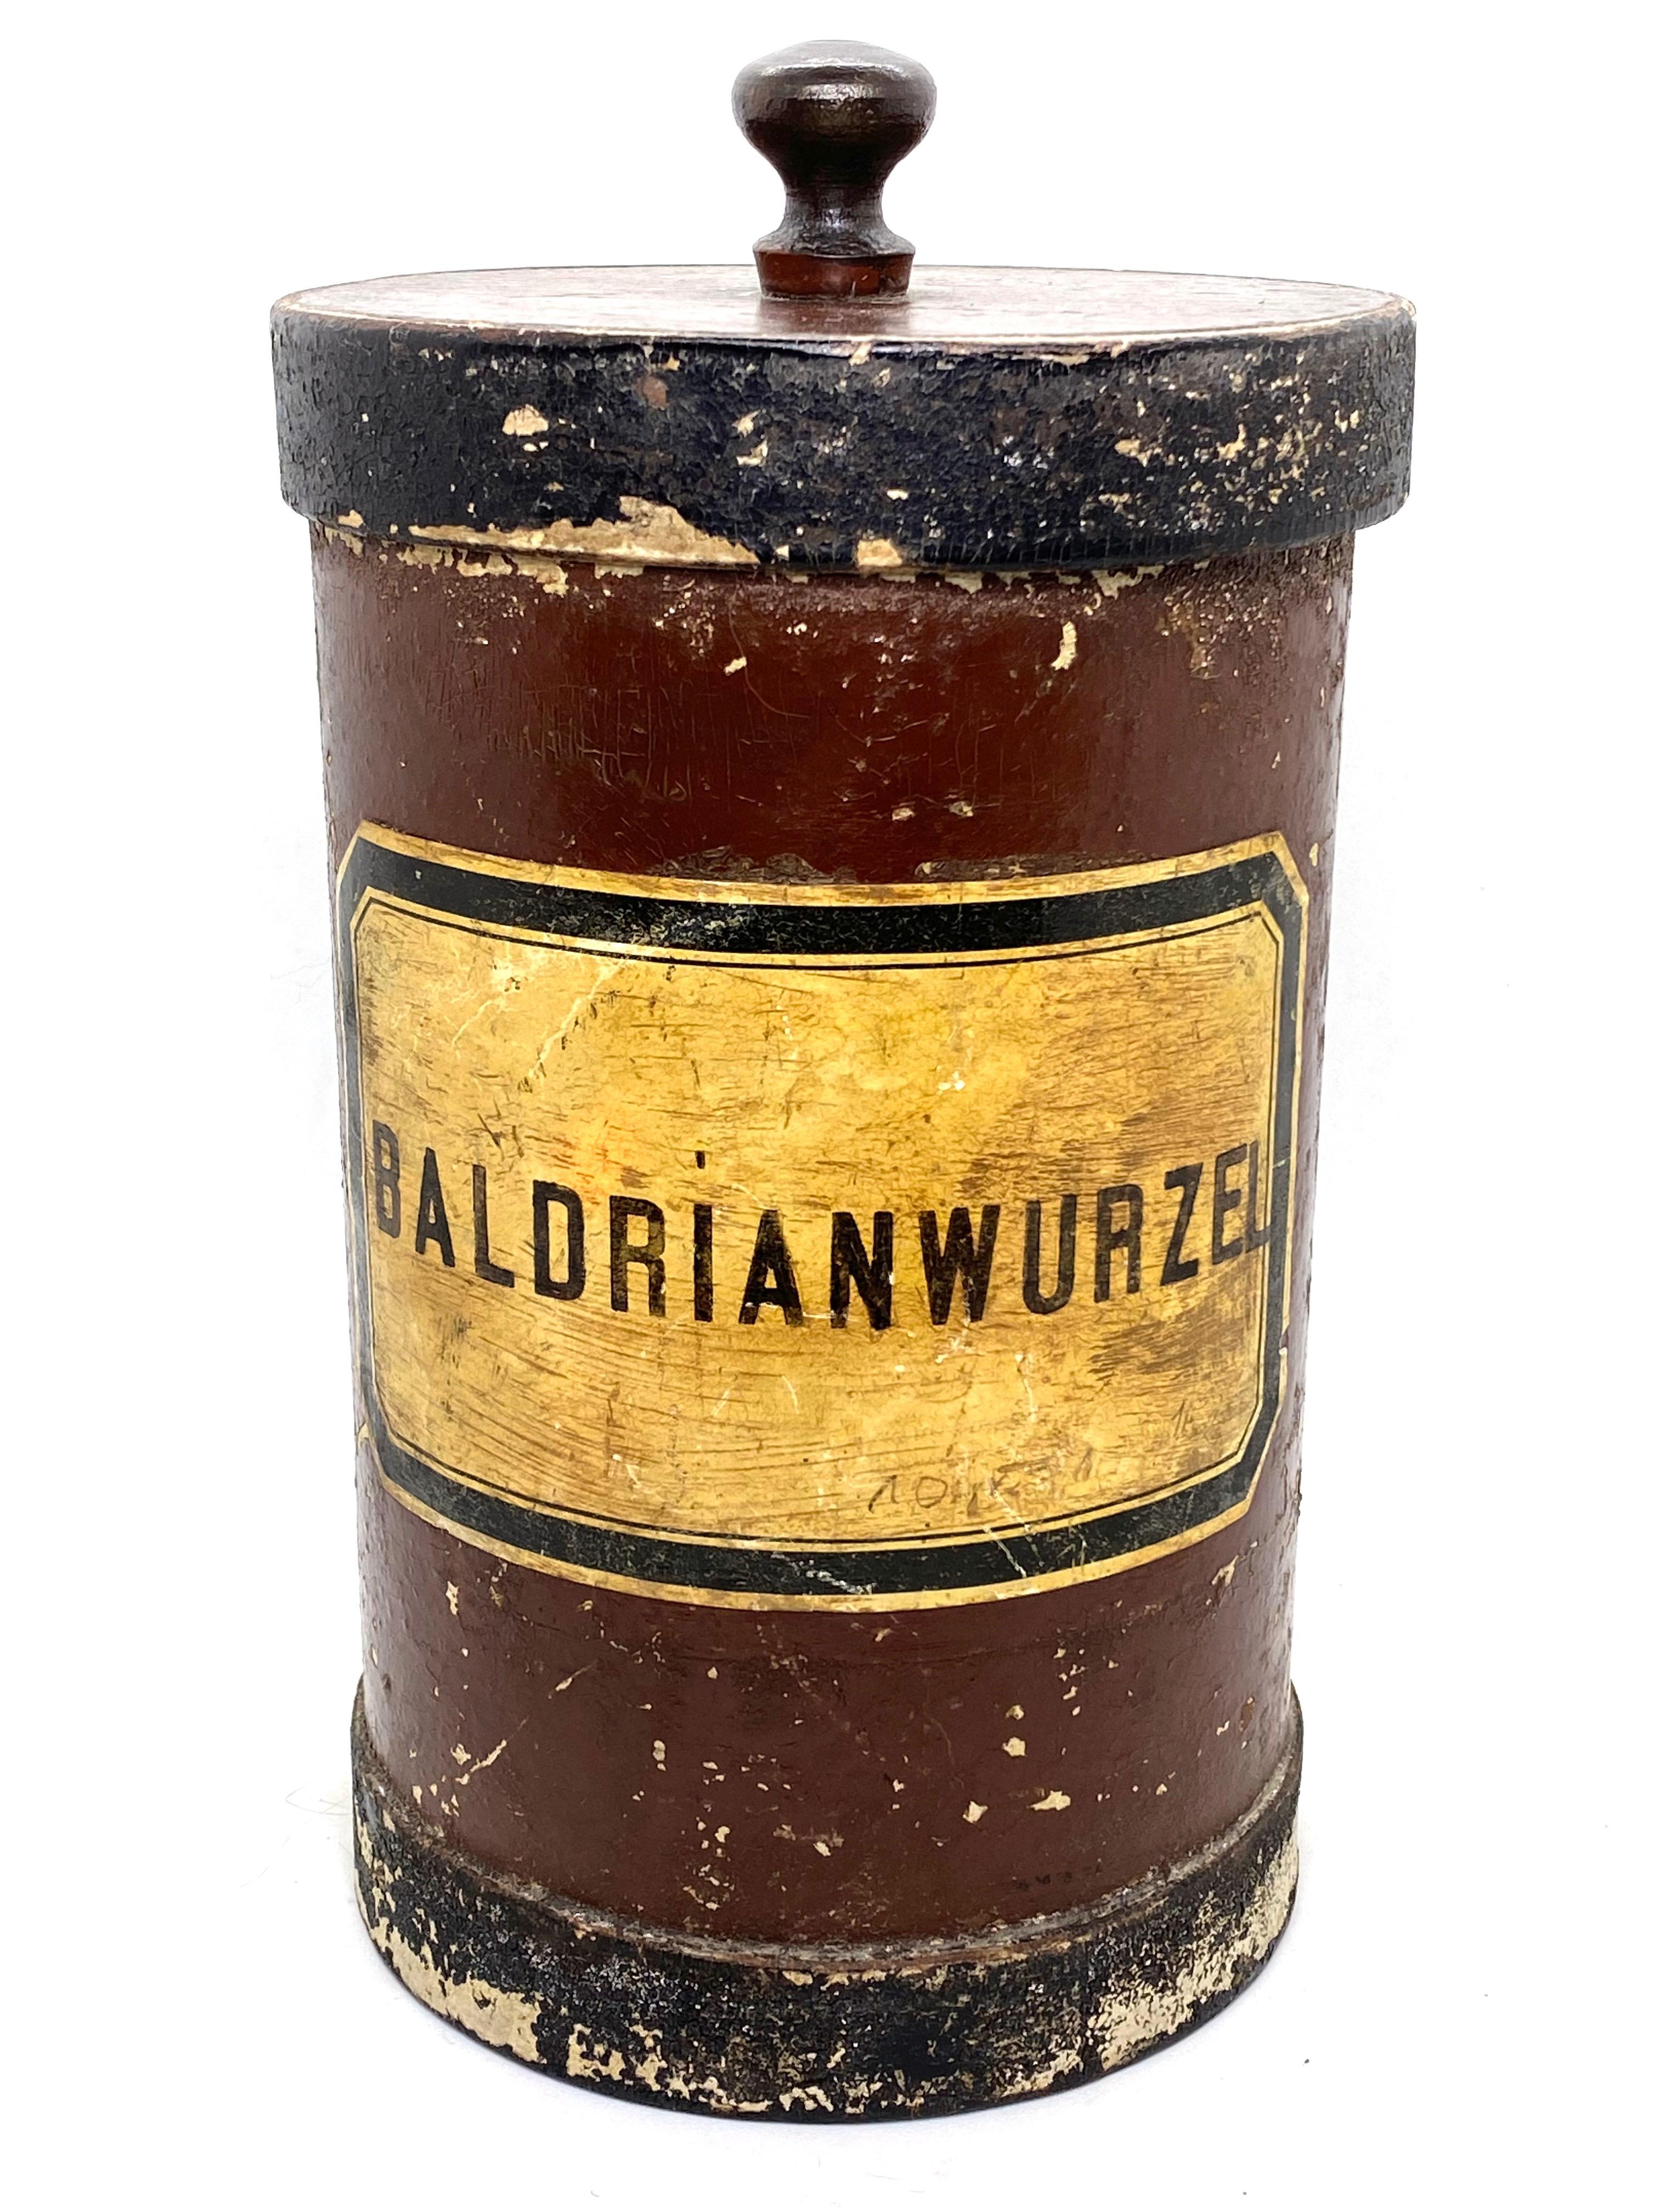 Classic early 1900s wooden and cardboard apothecary pharmacy storage jar or box for Valerian Root. Nice addition to your room or just for use it on your desk. Found at an estate sale in Nuremberg, Germany.